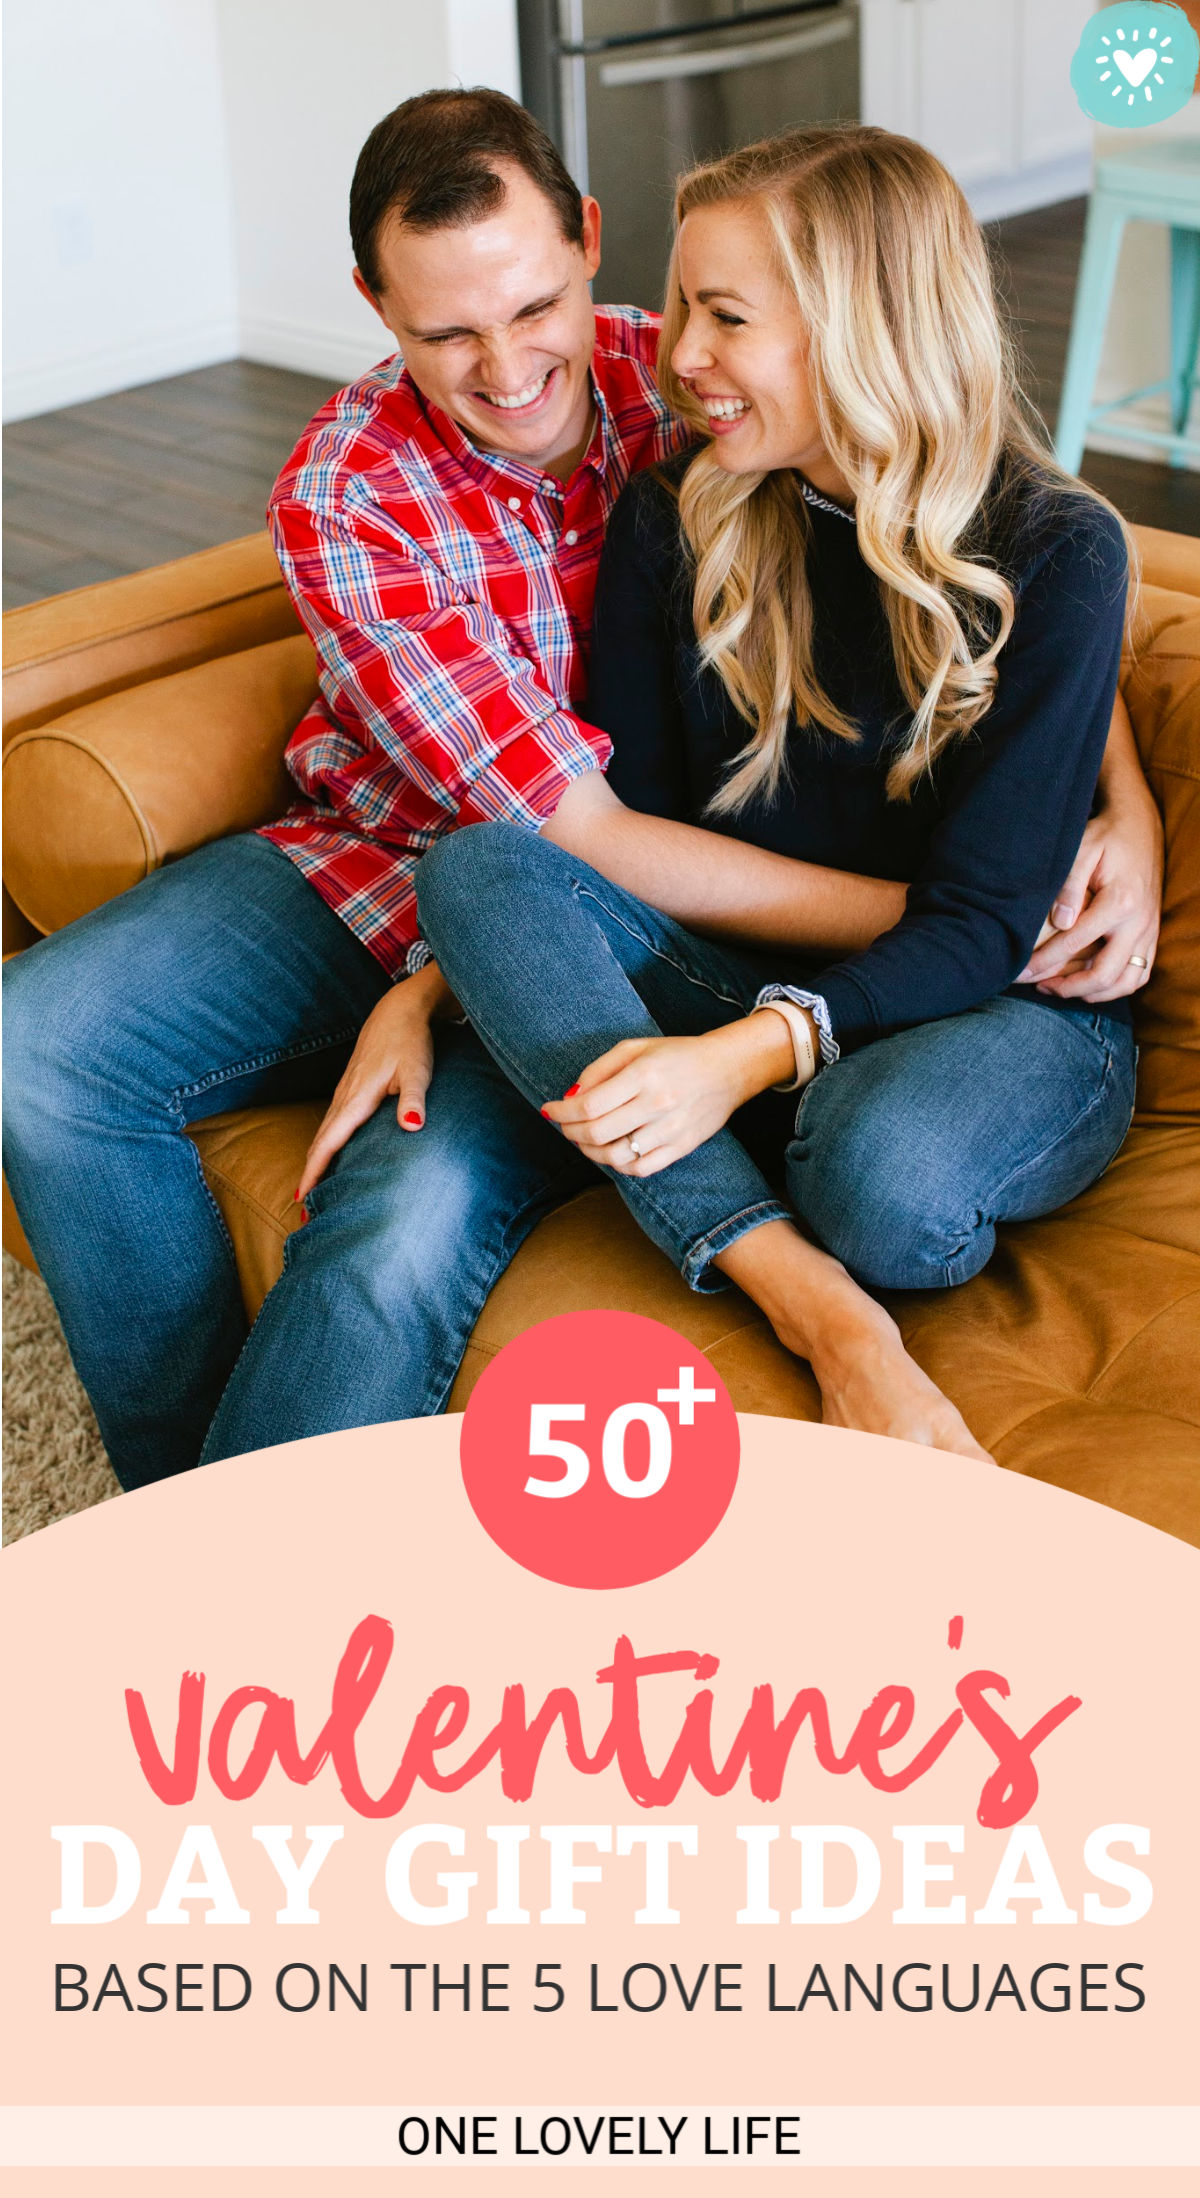 14 Days of Valentine's (Based on the 5 Love Languages) from One Lovely Life